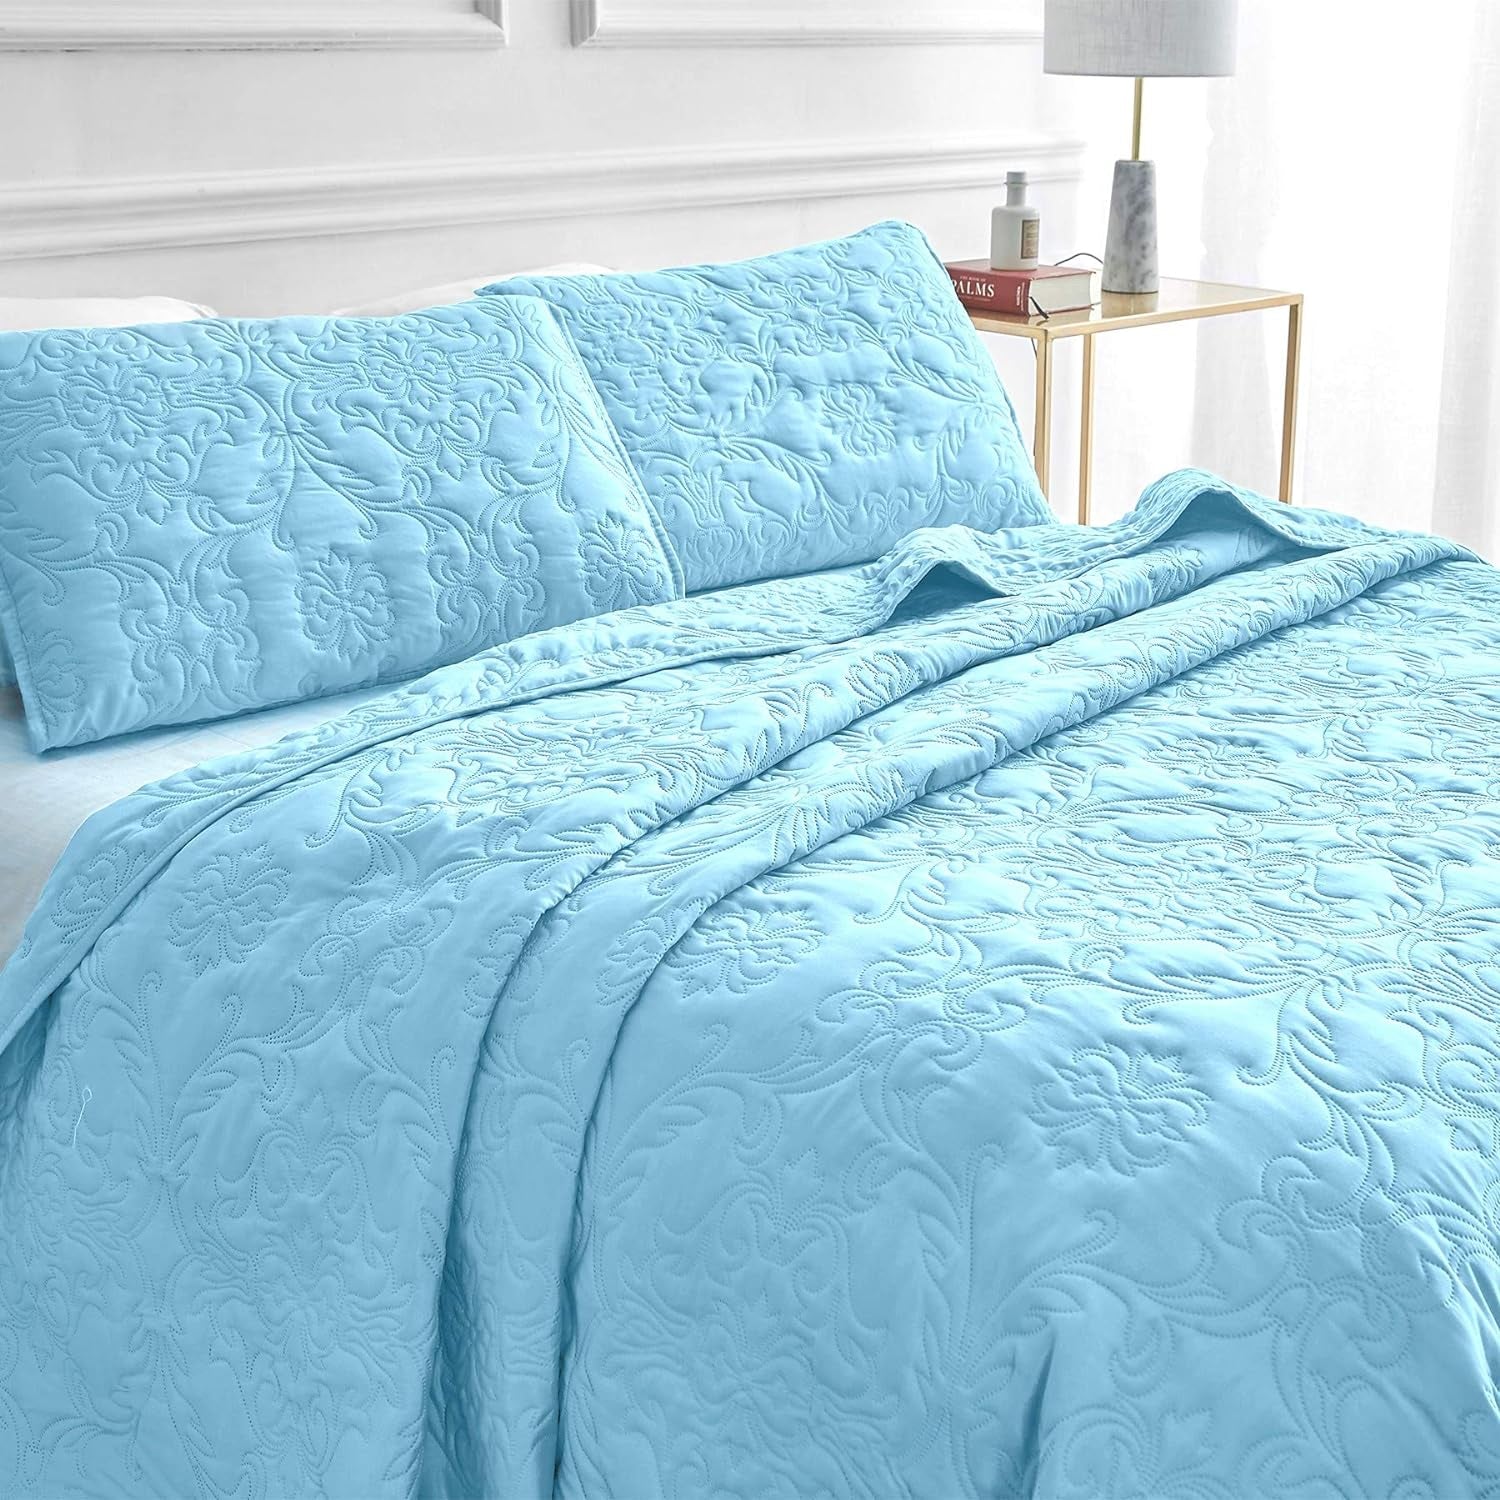 Sophia and William 2 Pieces Quilt Set Twin Size with 1 Quilt and 1 Pillow Sham, Reversible Microfiber Bedding Bedspread Coverlet Set, Cozy, Lightweight and Hypoallergenic, Light Blue